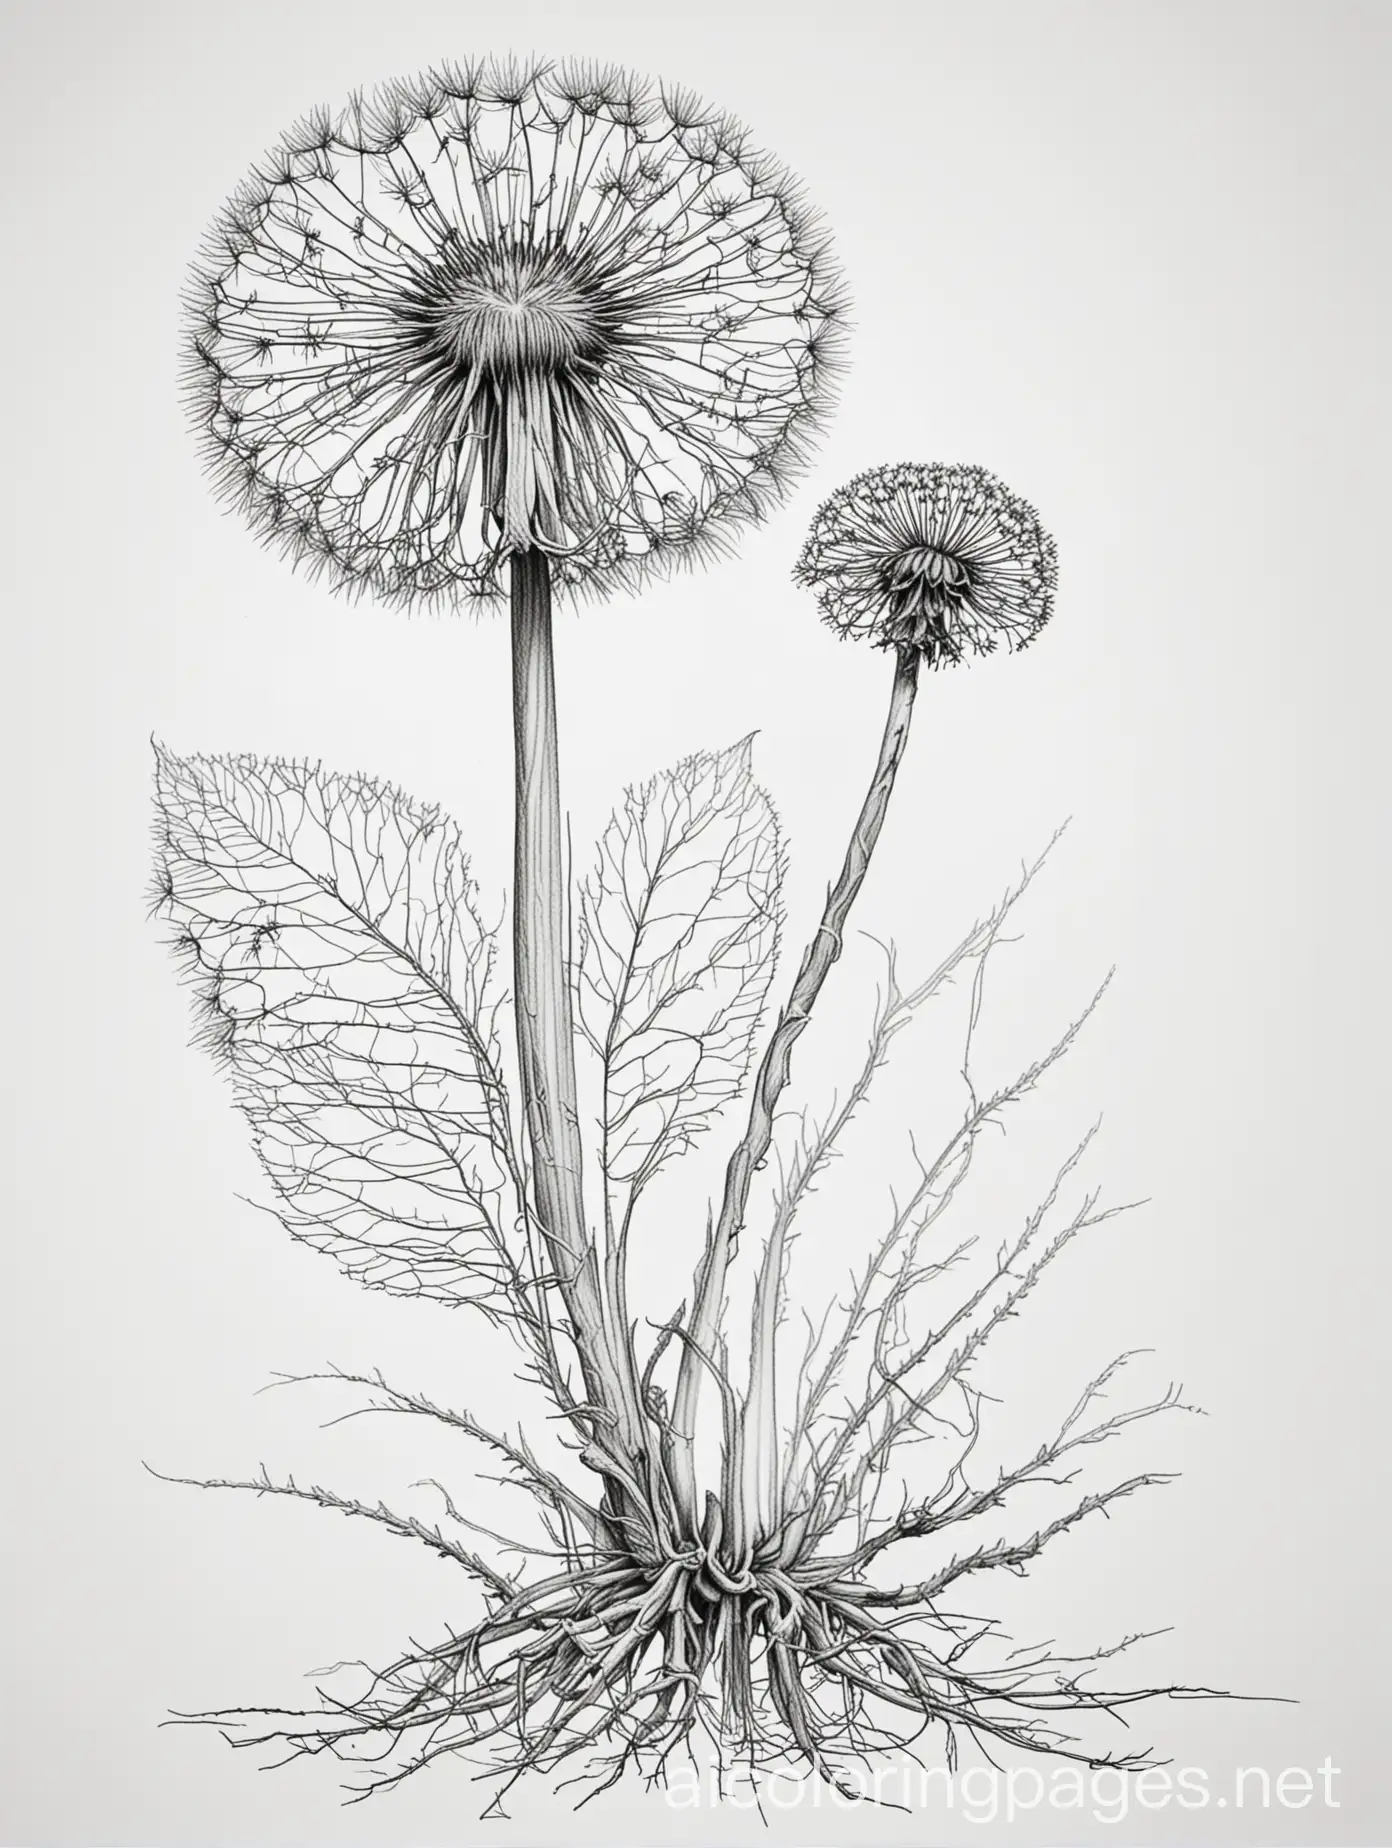 Anatomy of a Dandelion plant and the root , Coloring Page, black and white, line art, white background, Simplicity, Ample White Space. The background of the coloring page is plain white to make it easy for young children to color within the lines. The outlines of all the subjects are easy to distinguish, making it simple for kids to color without too much difficulty